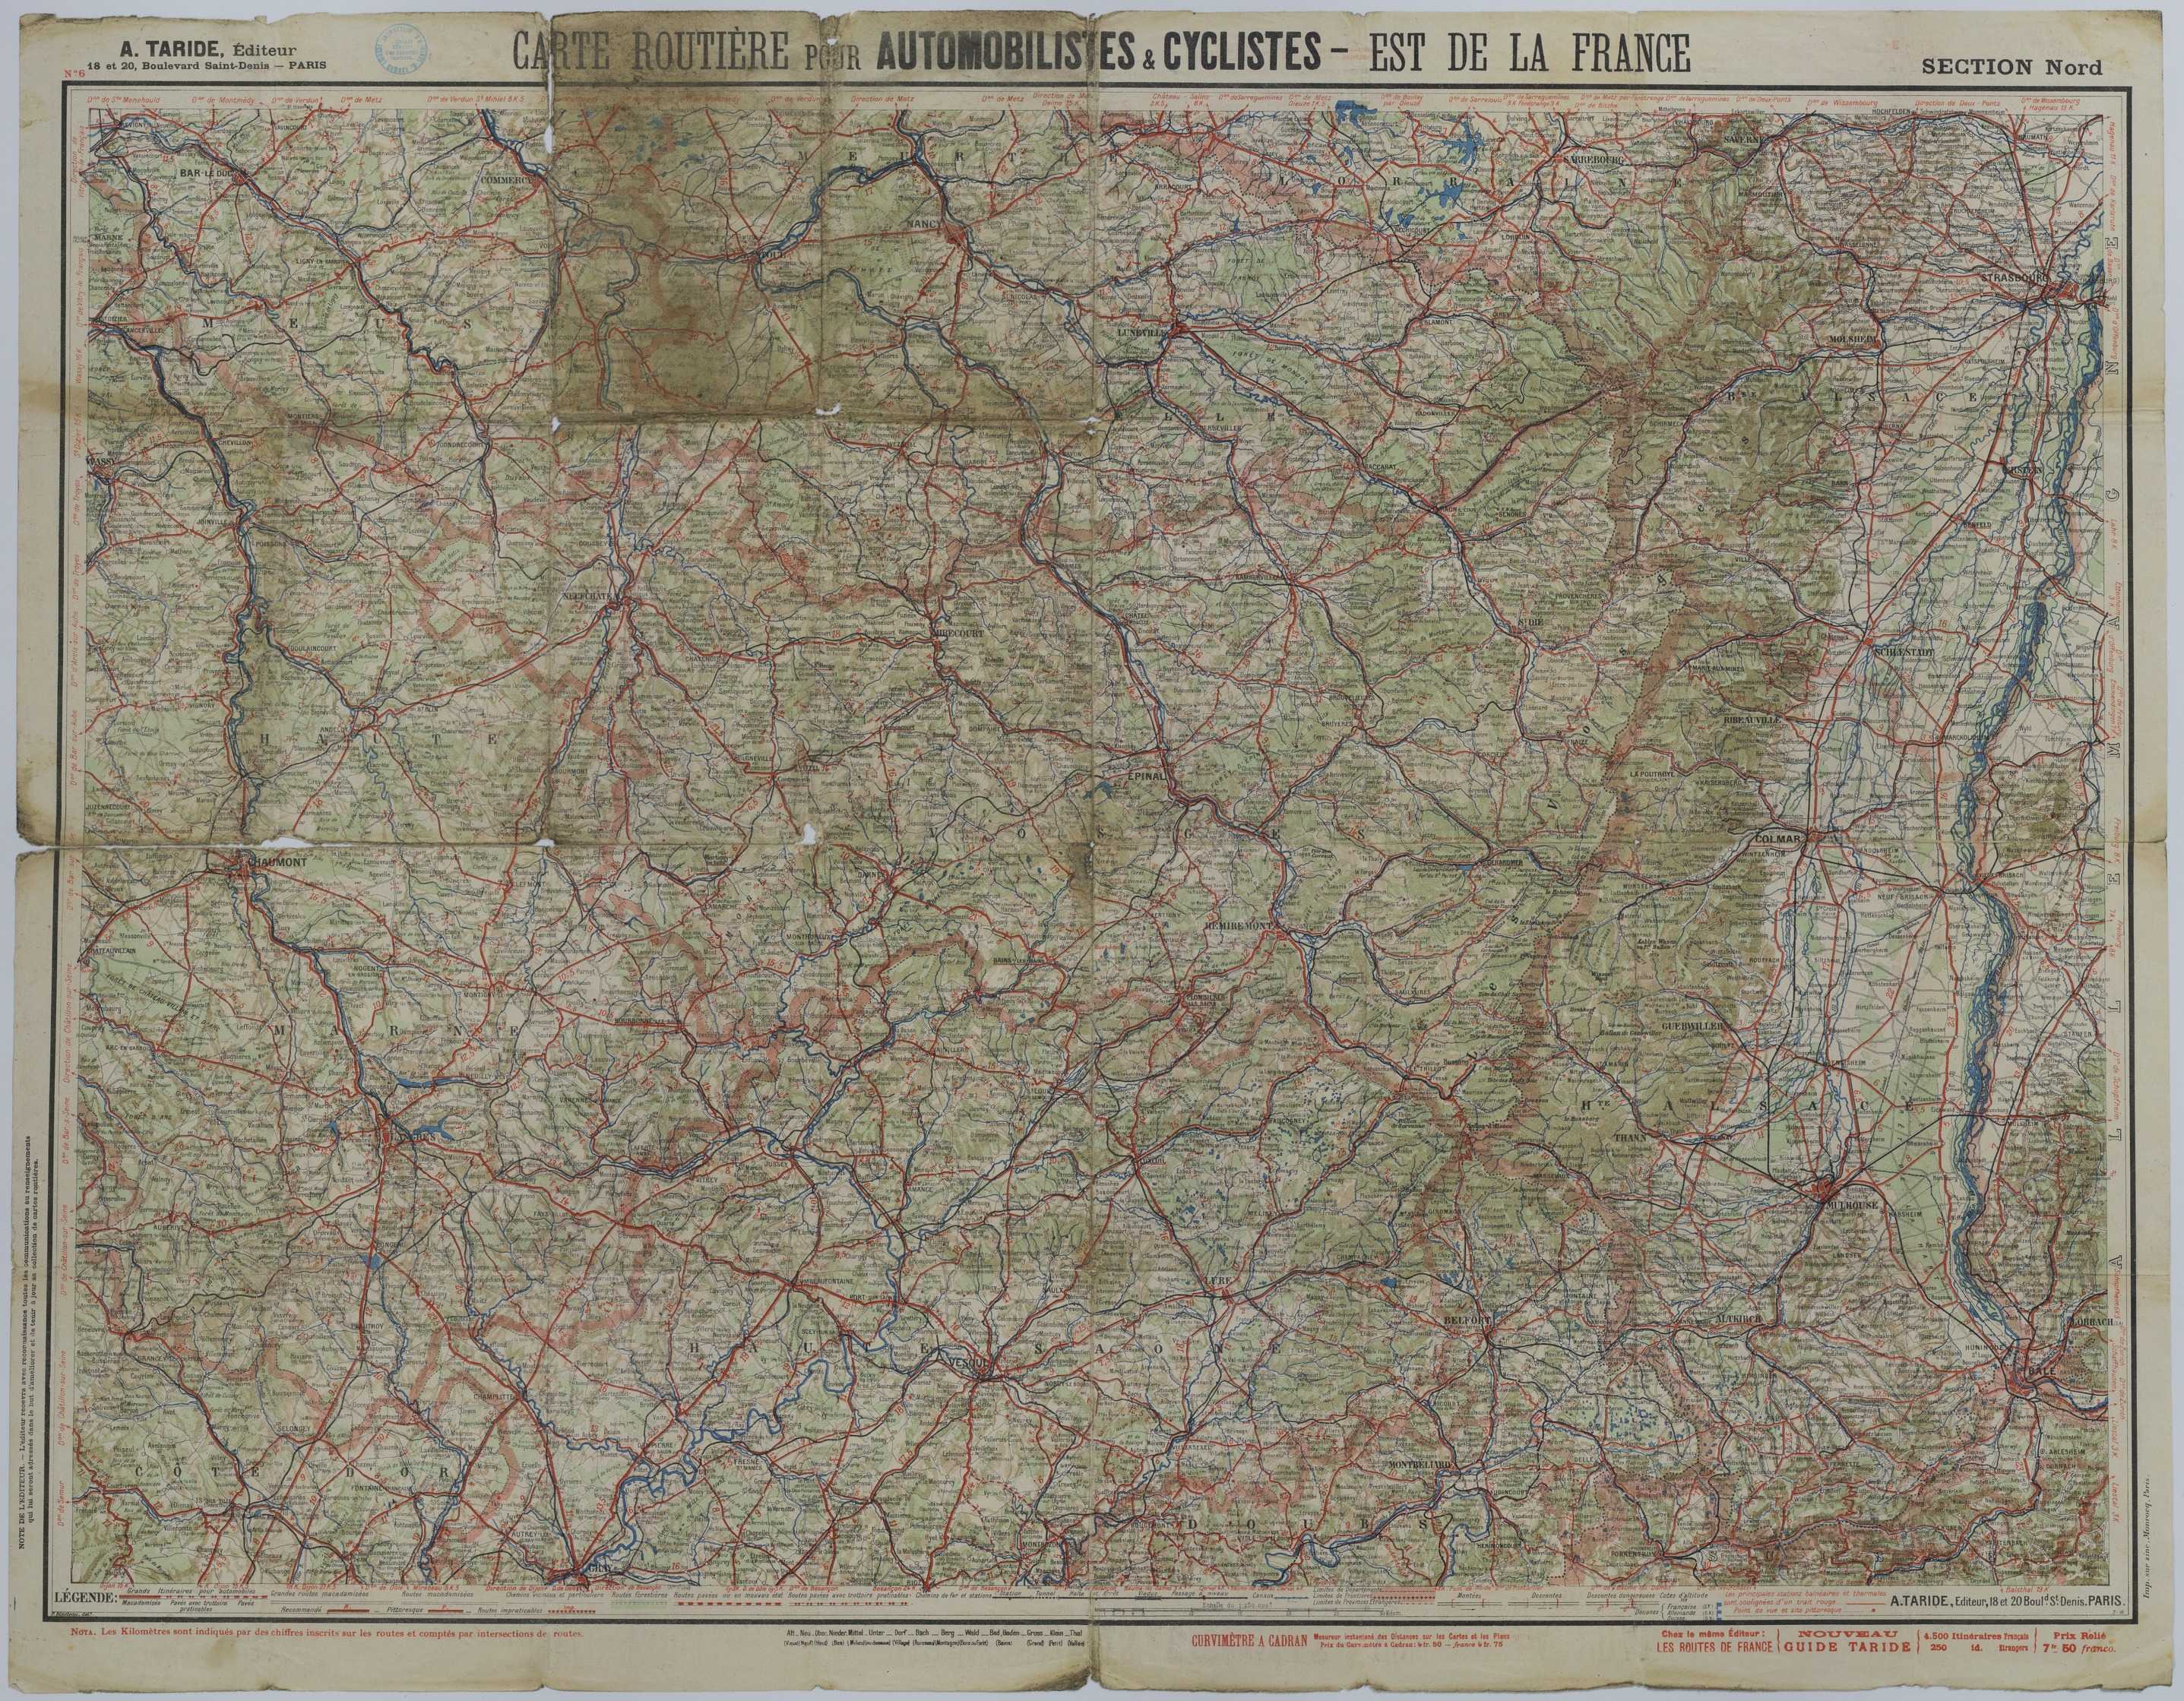 Map of Automobile and Bicycle Routes in Northeast France